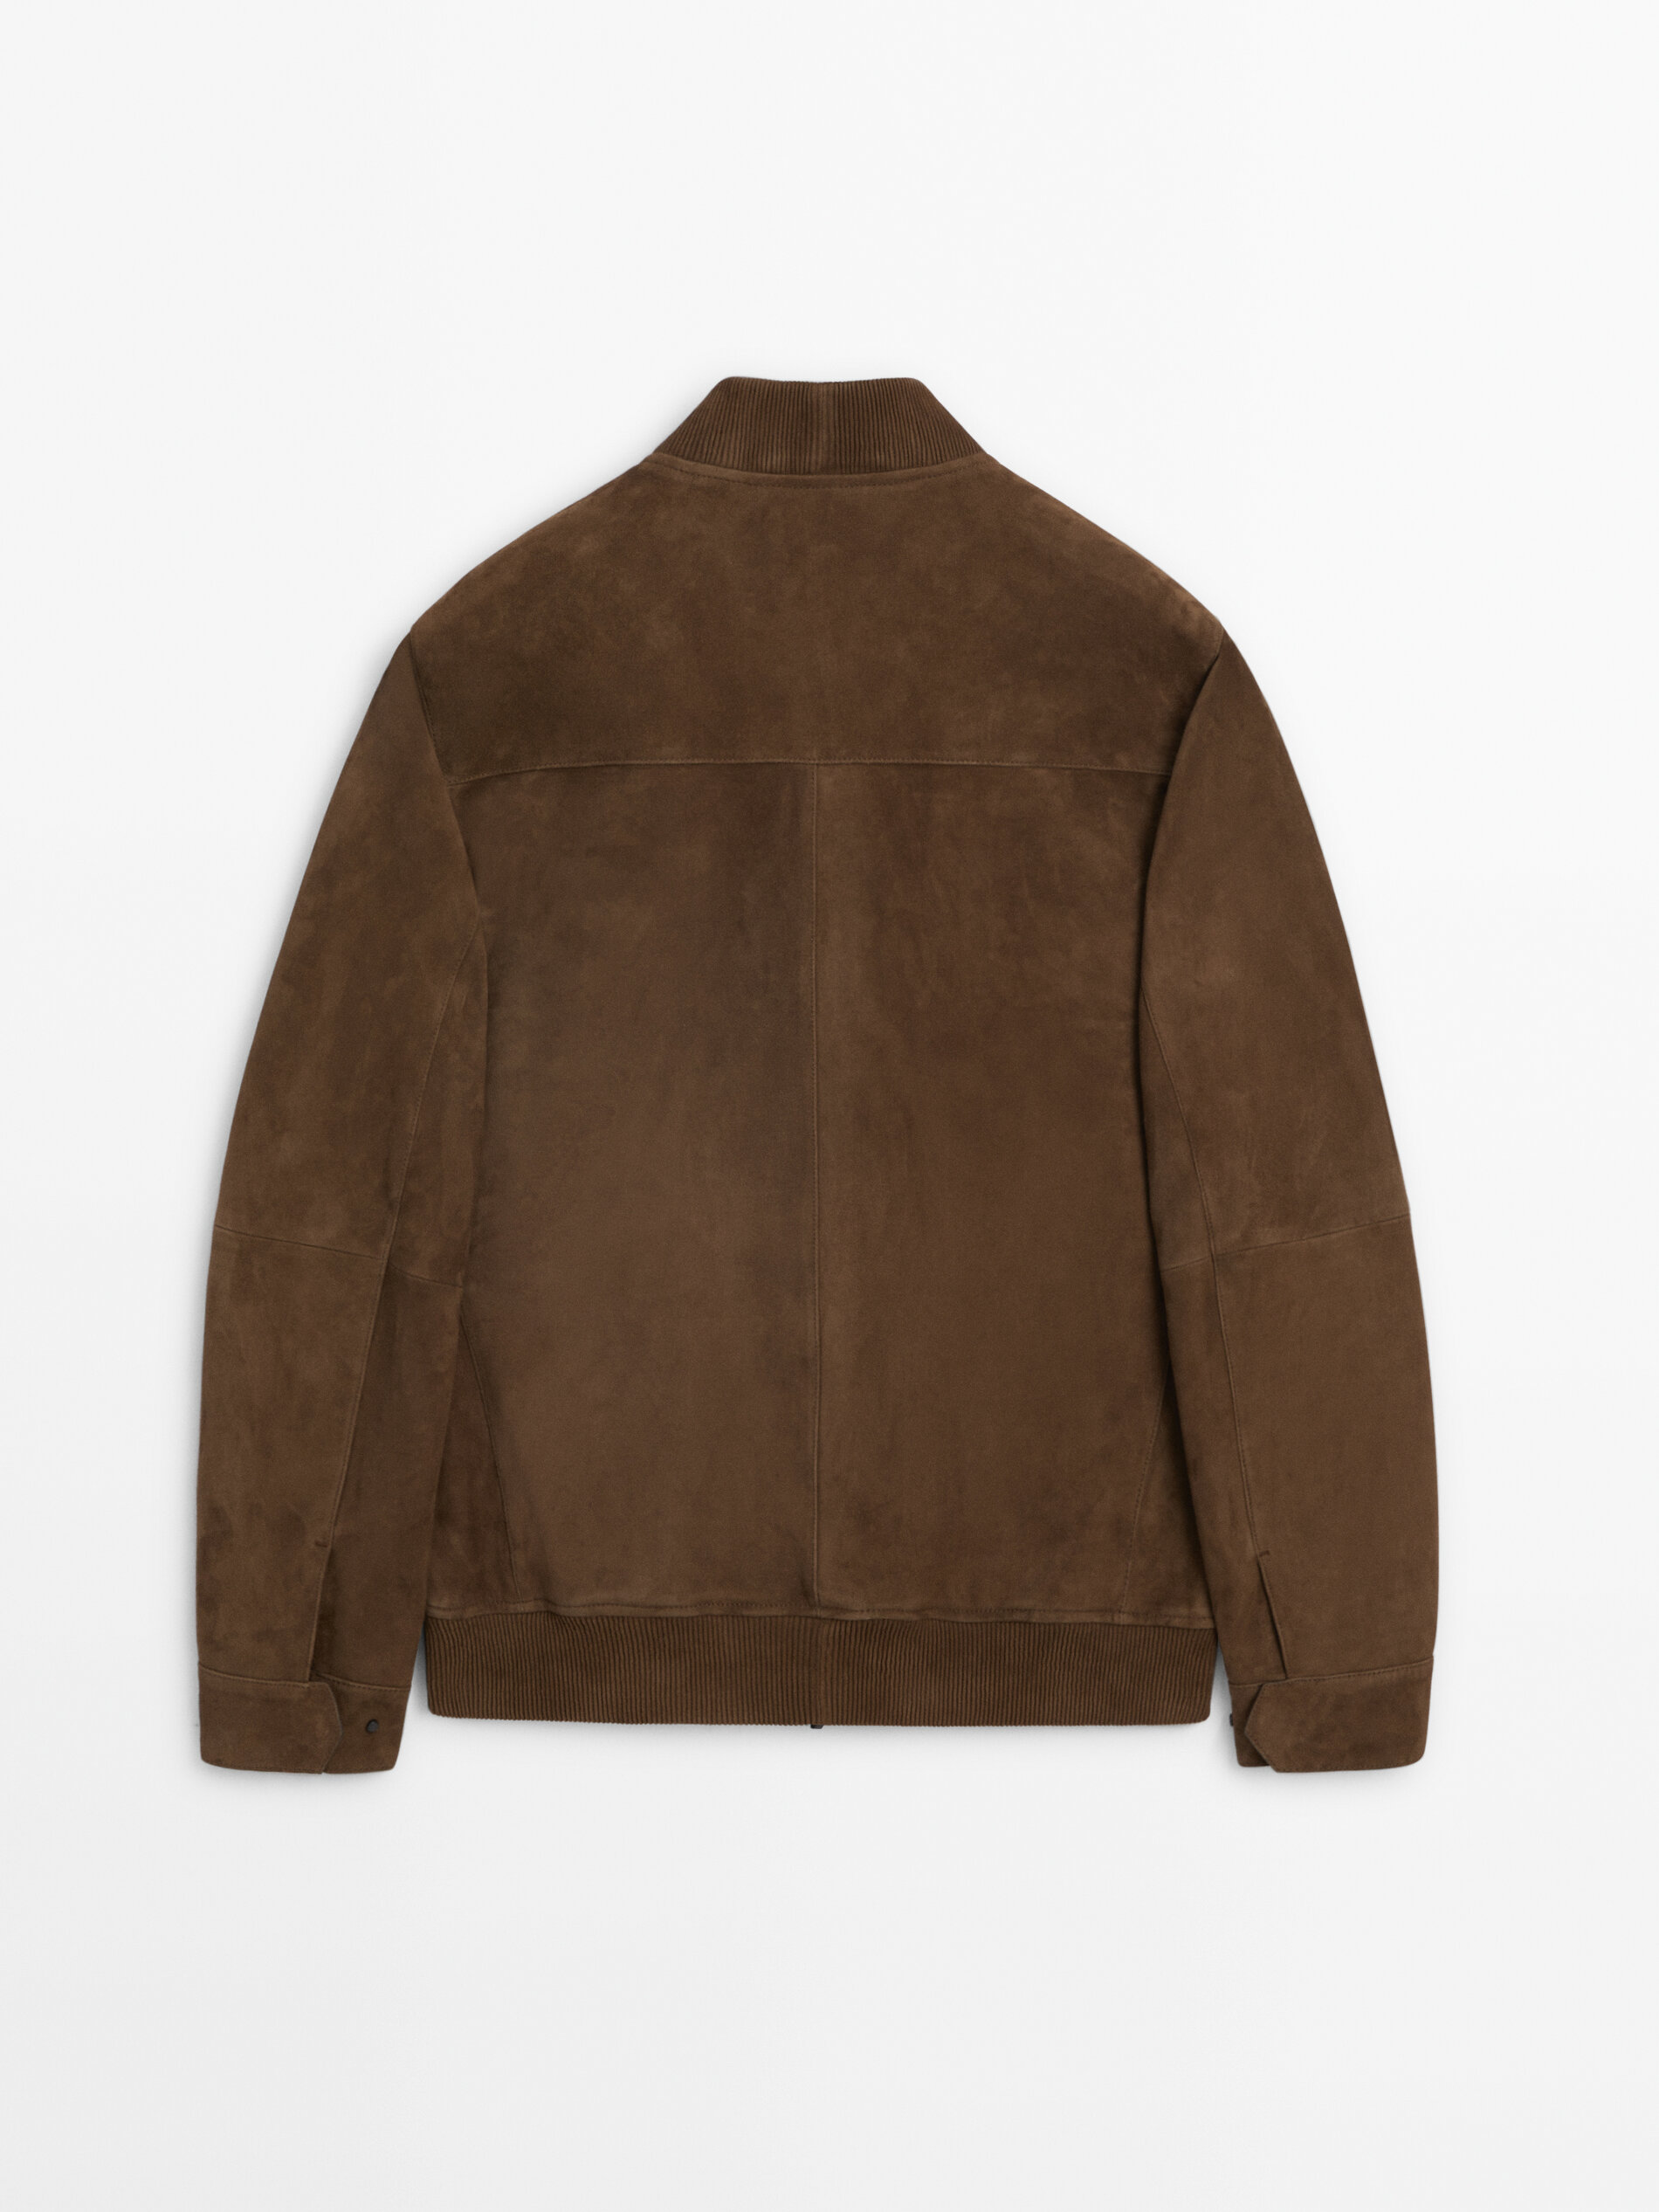 Suede leather bomber jacket with pockets